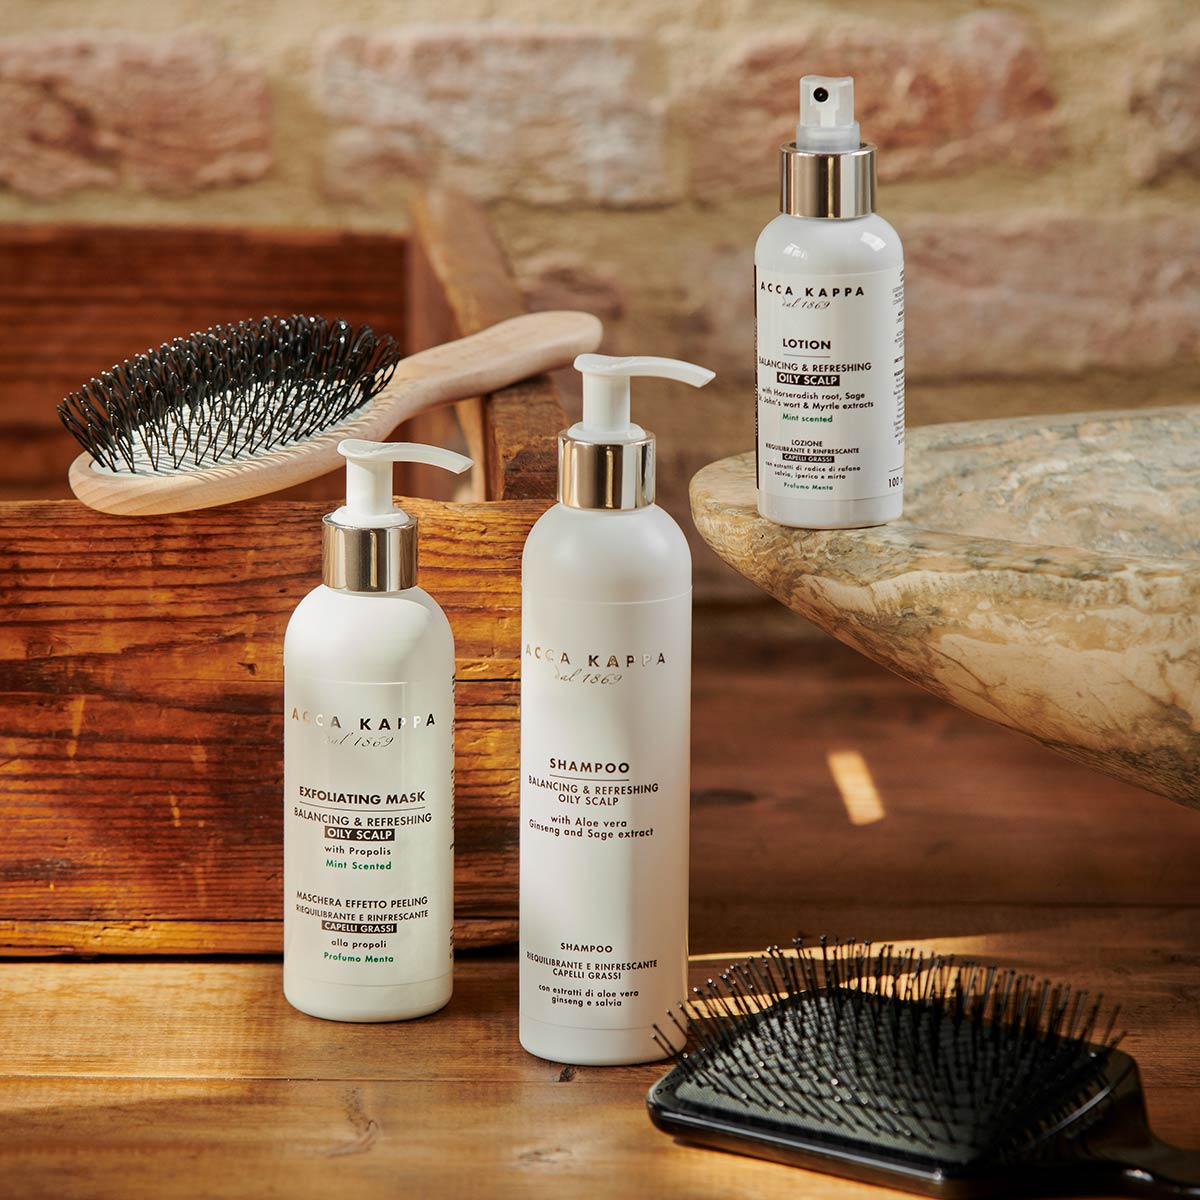 Acca Kappa lifestlye products for hair